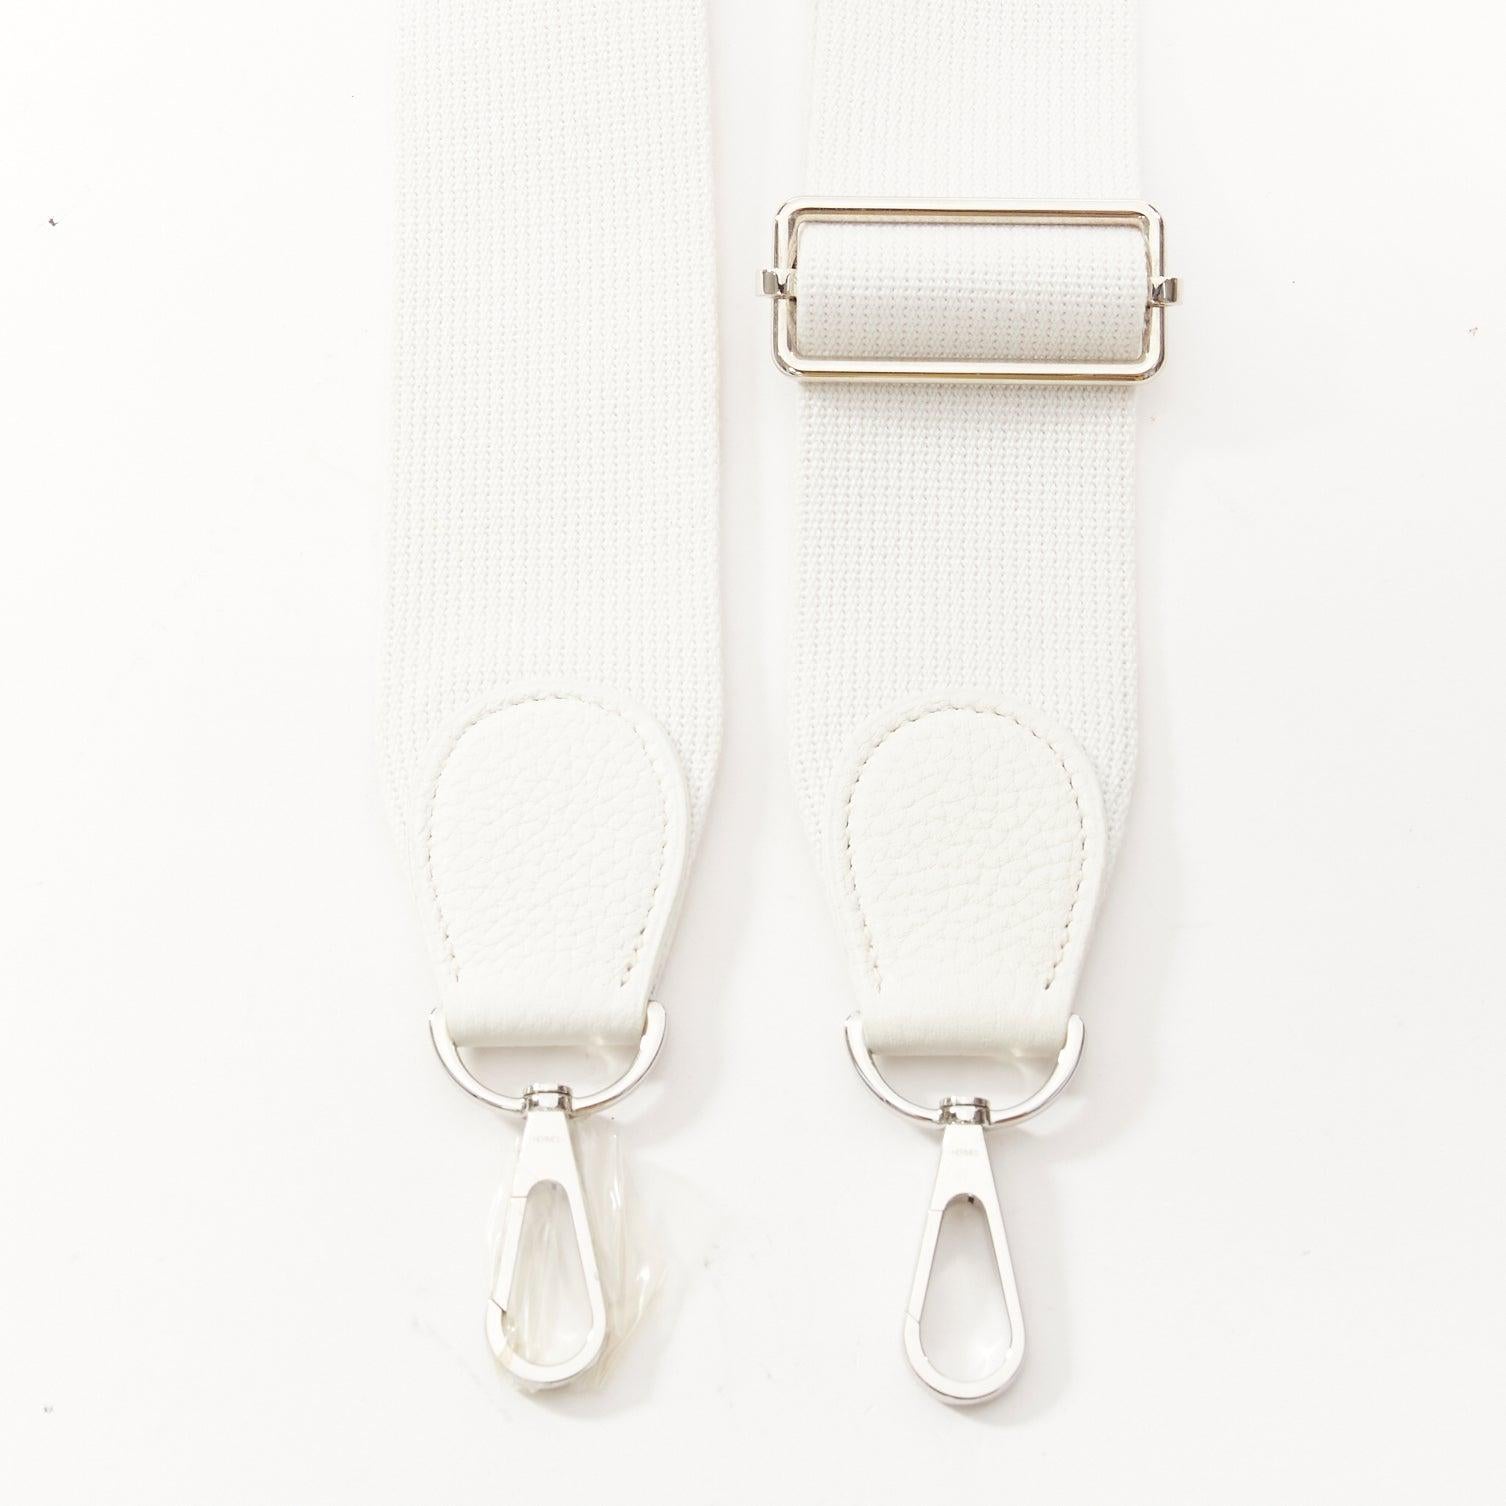 HERMES Sangle 50 white canvas leather silver hardware wide long bag strap
Reference: AAWC/A01181
Brand: Hermes
Model: Sangle 50
Material: Canvas
Color: White, Silver
Pattern: Solid
Closure: Lobster Clasp
Lining: White Canvas
Made in: